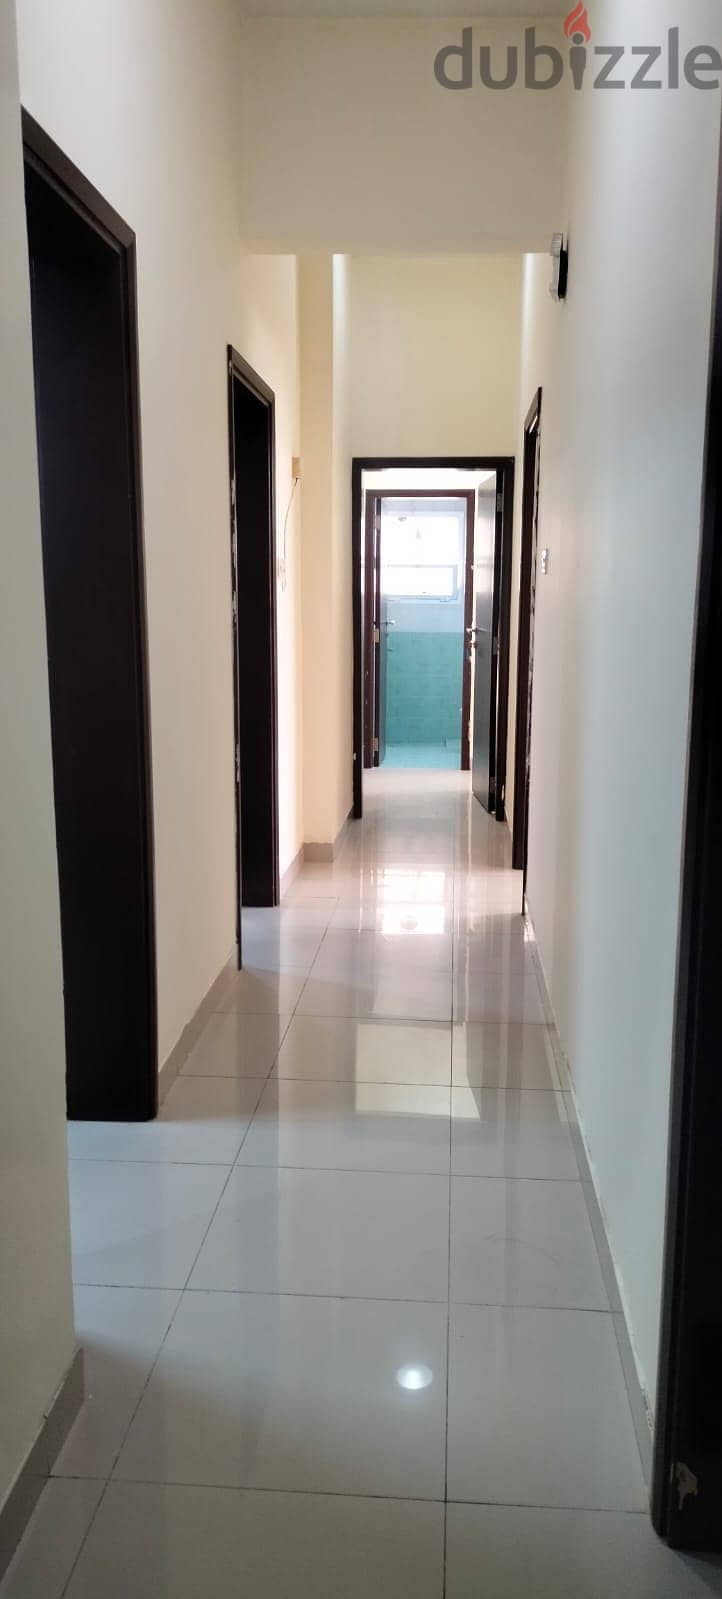 Flat 2 BHK For Rent in Hond road in Ruwi 3